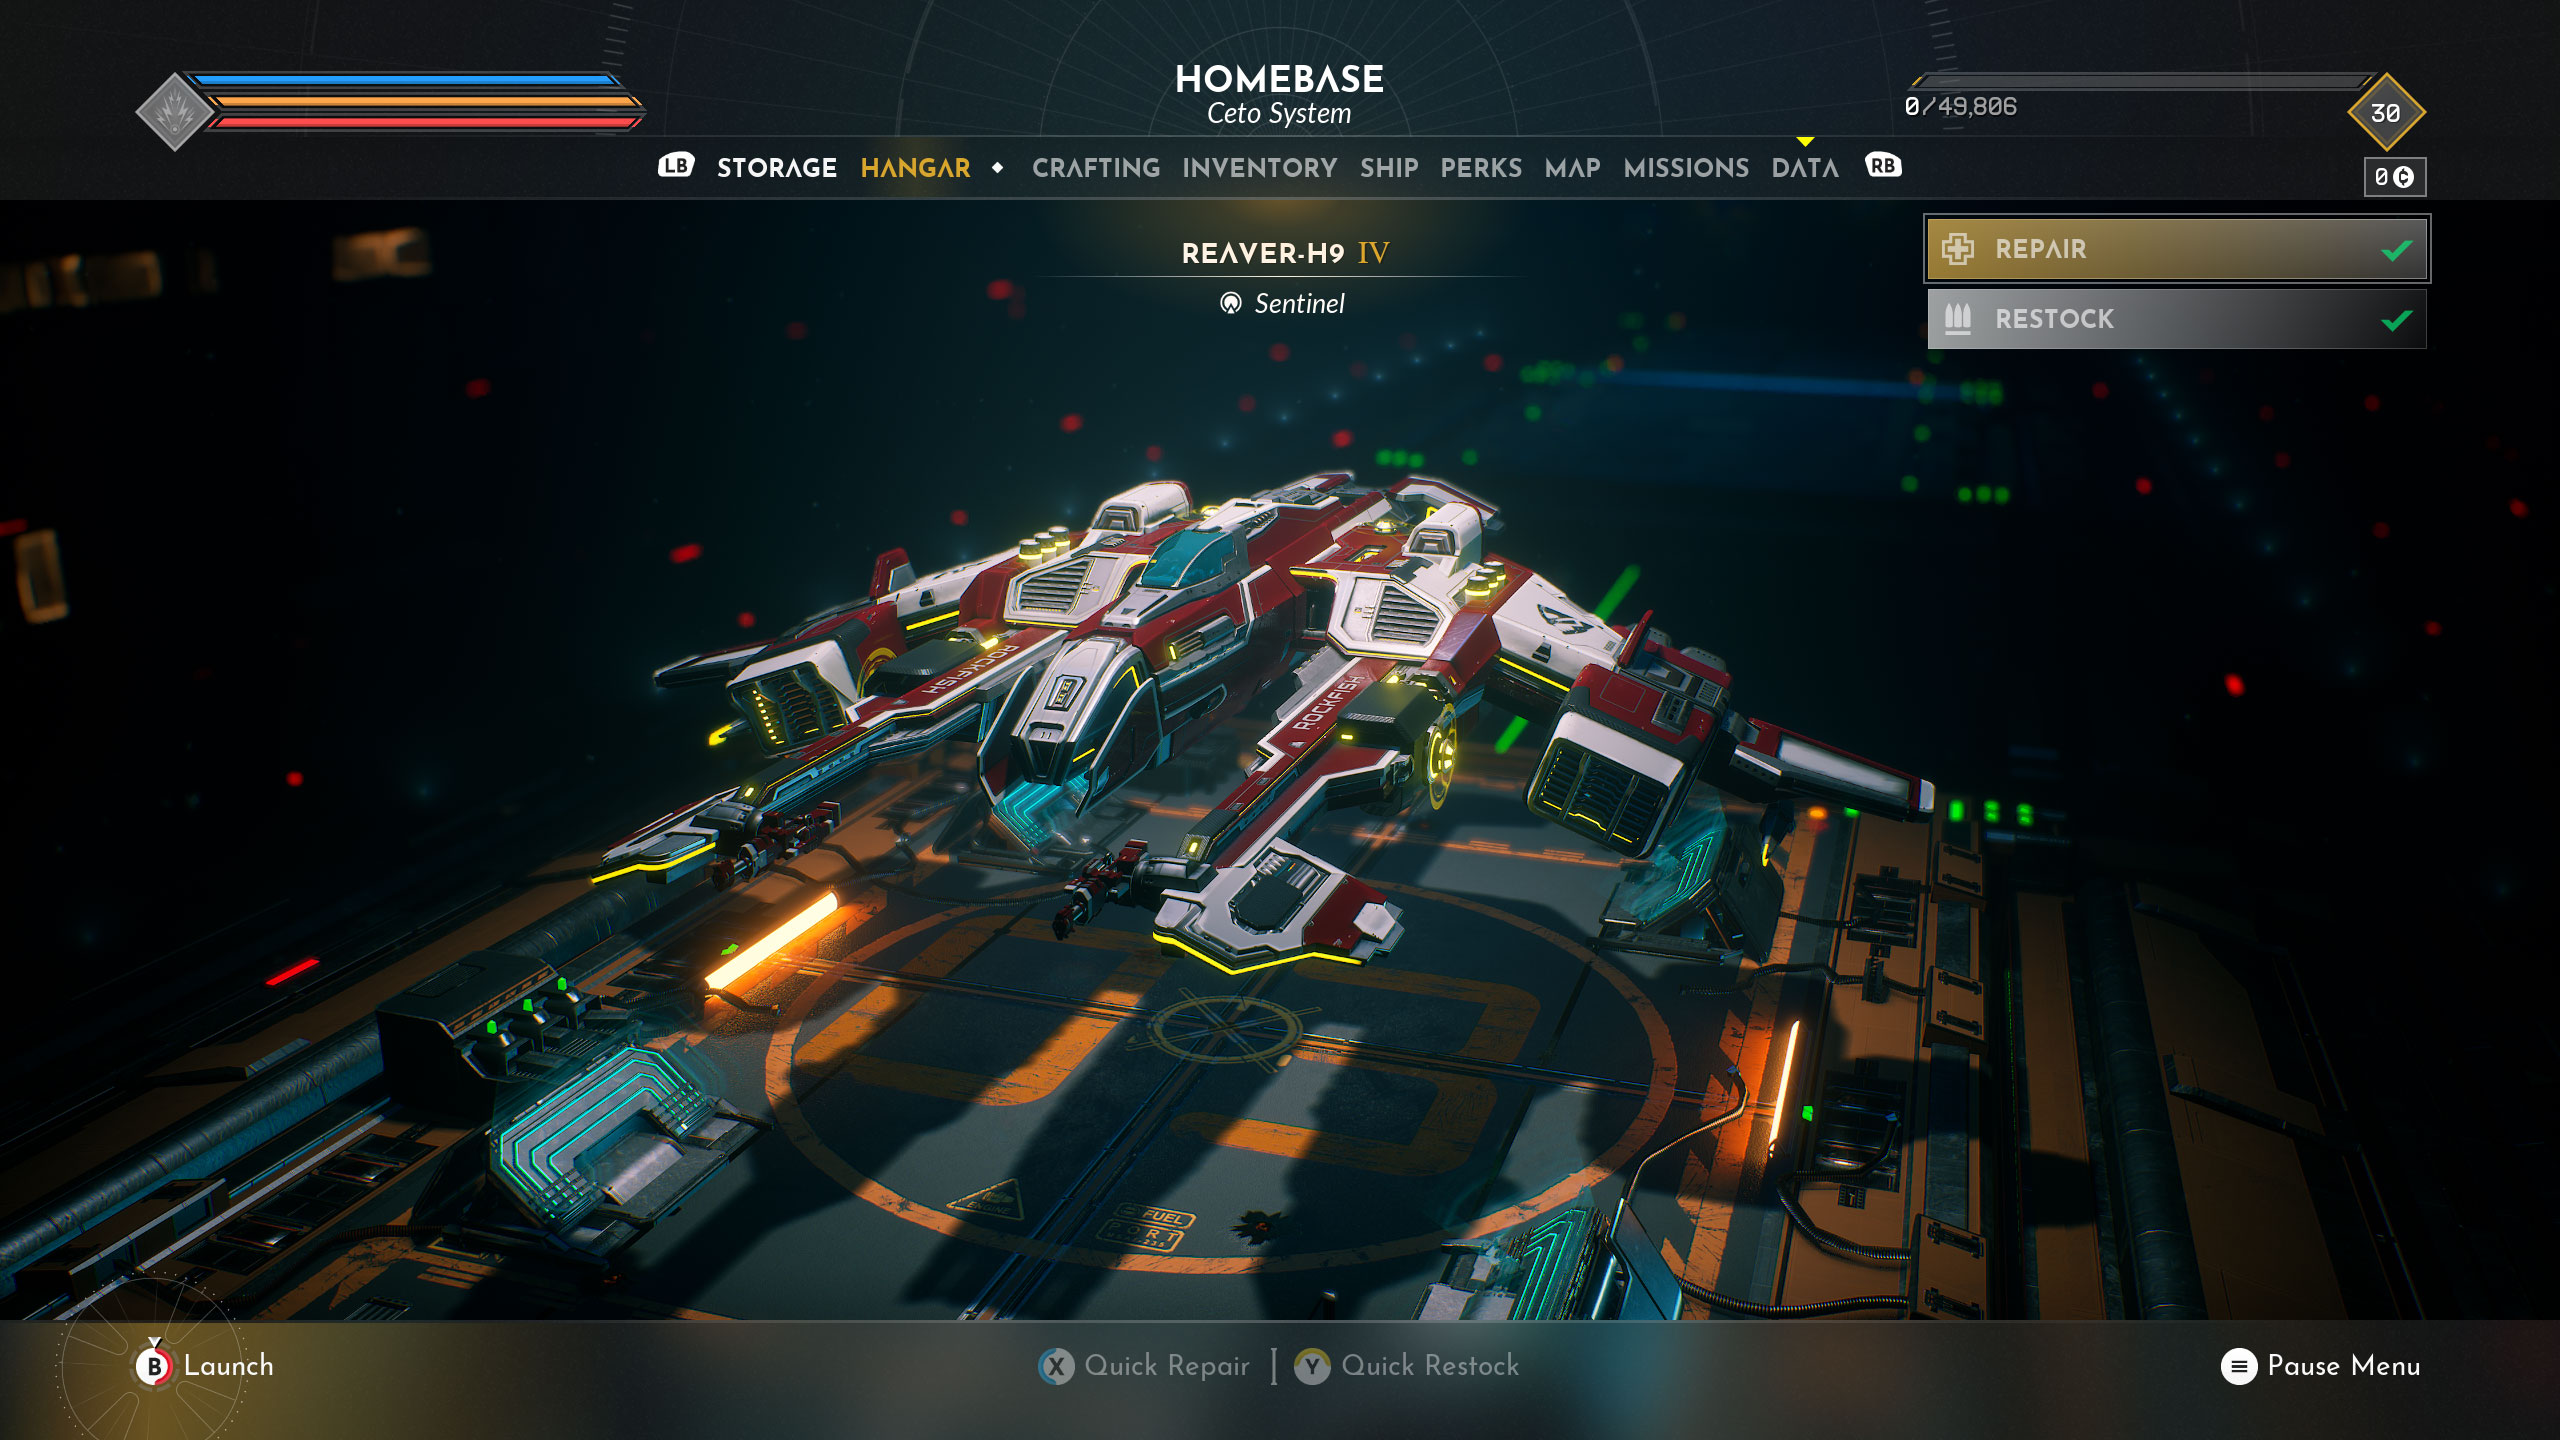 Everspace 2 is inching closer to being a modern Freelancer